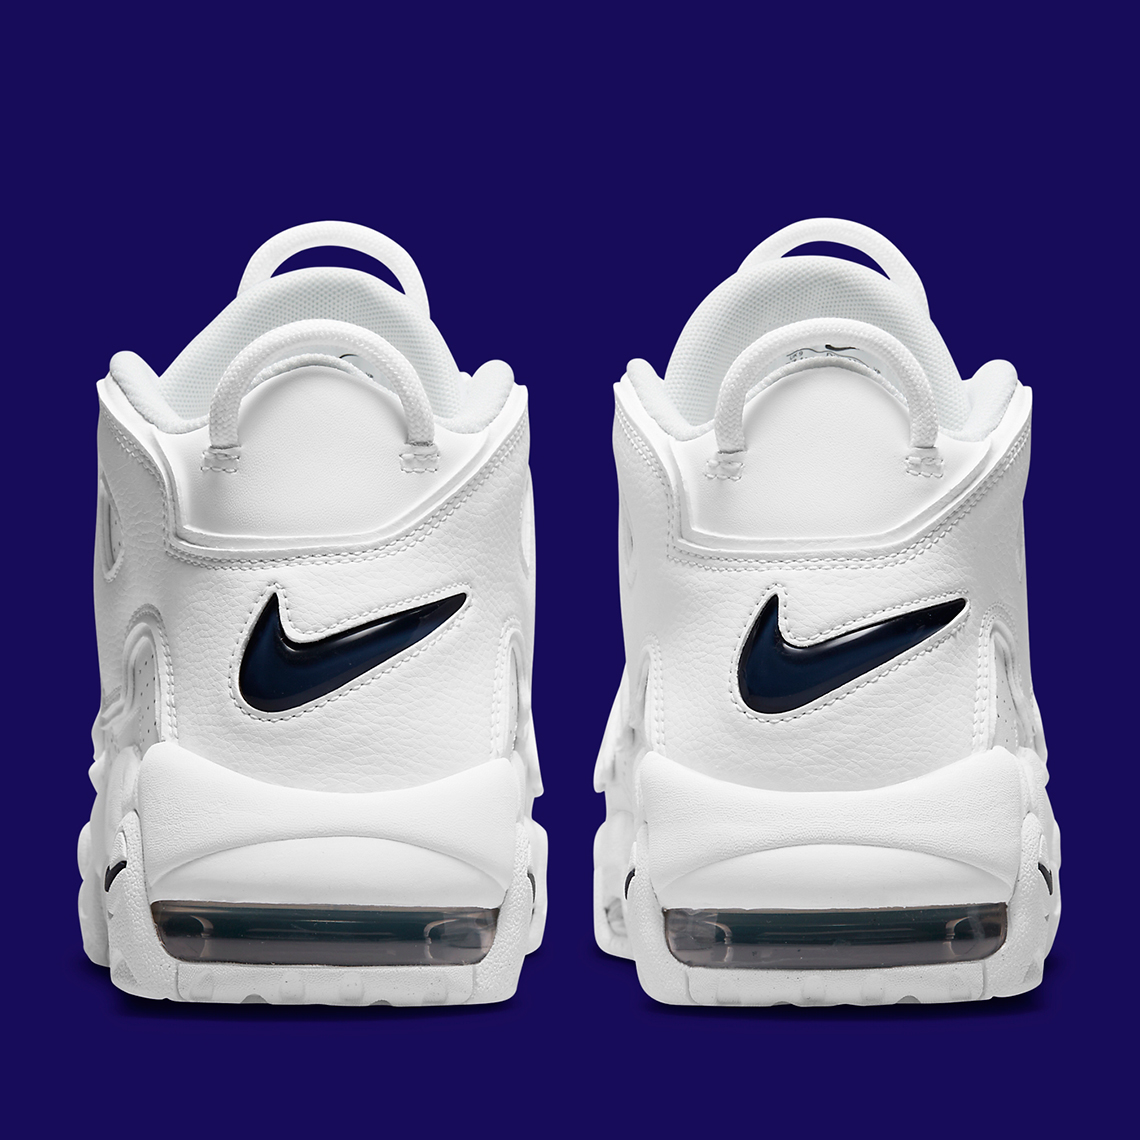 Nike Air More Uptempo White Navy Dh8011 100 5